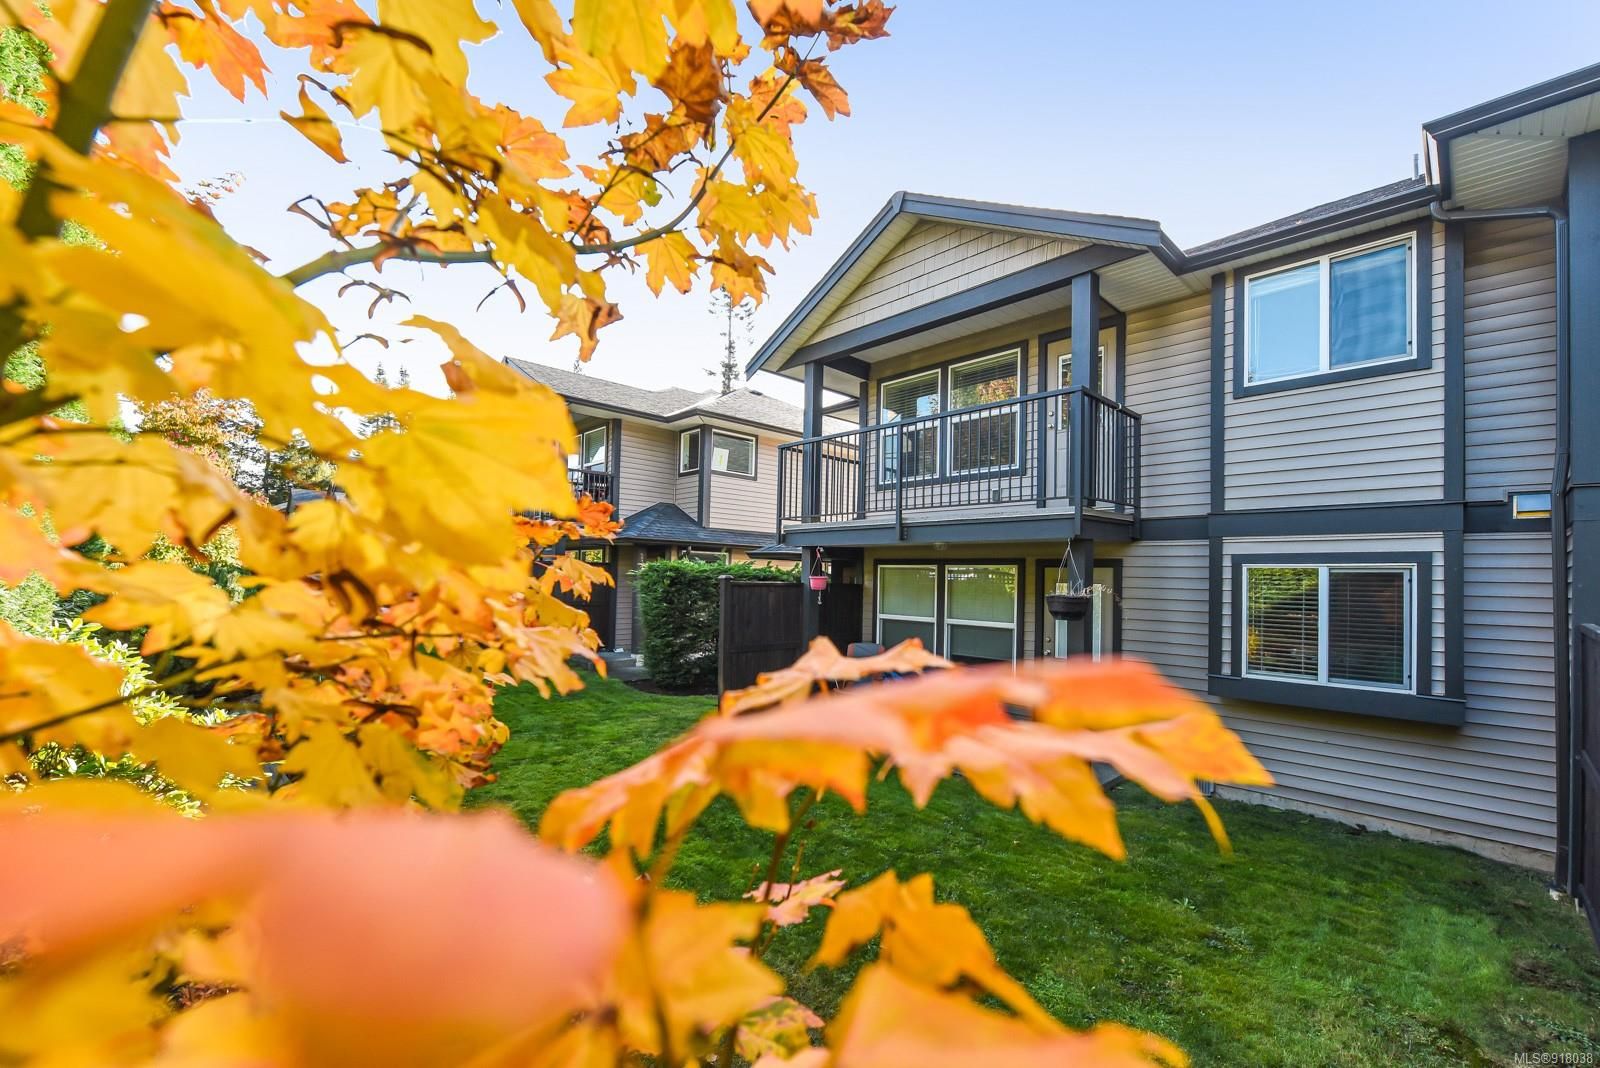 I have sold a property at 234 4699 Muir Rd in Courtenay
